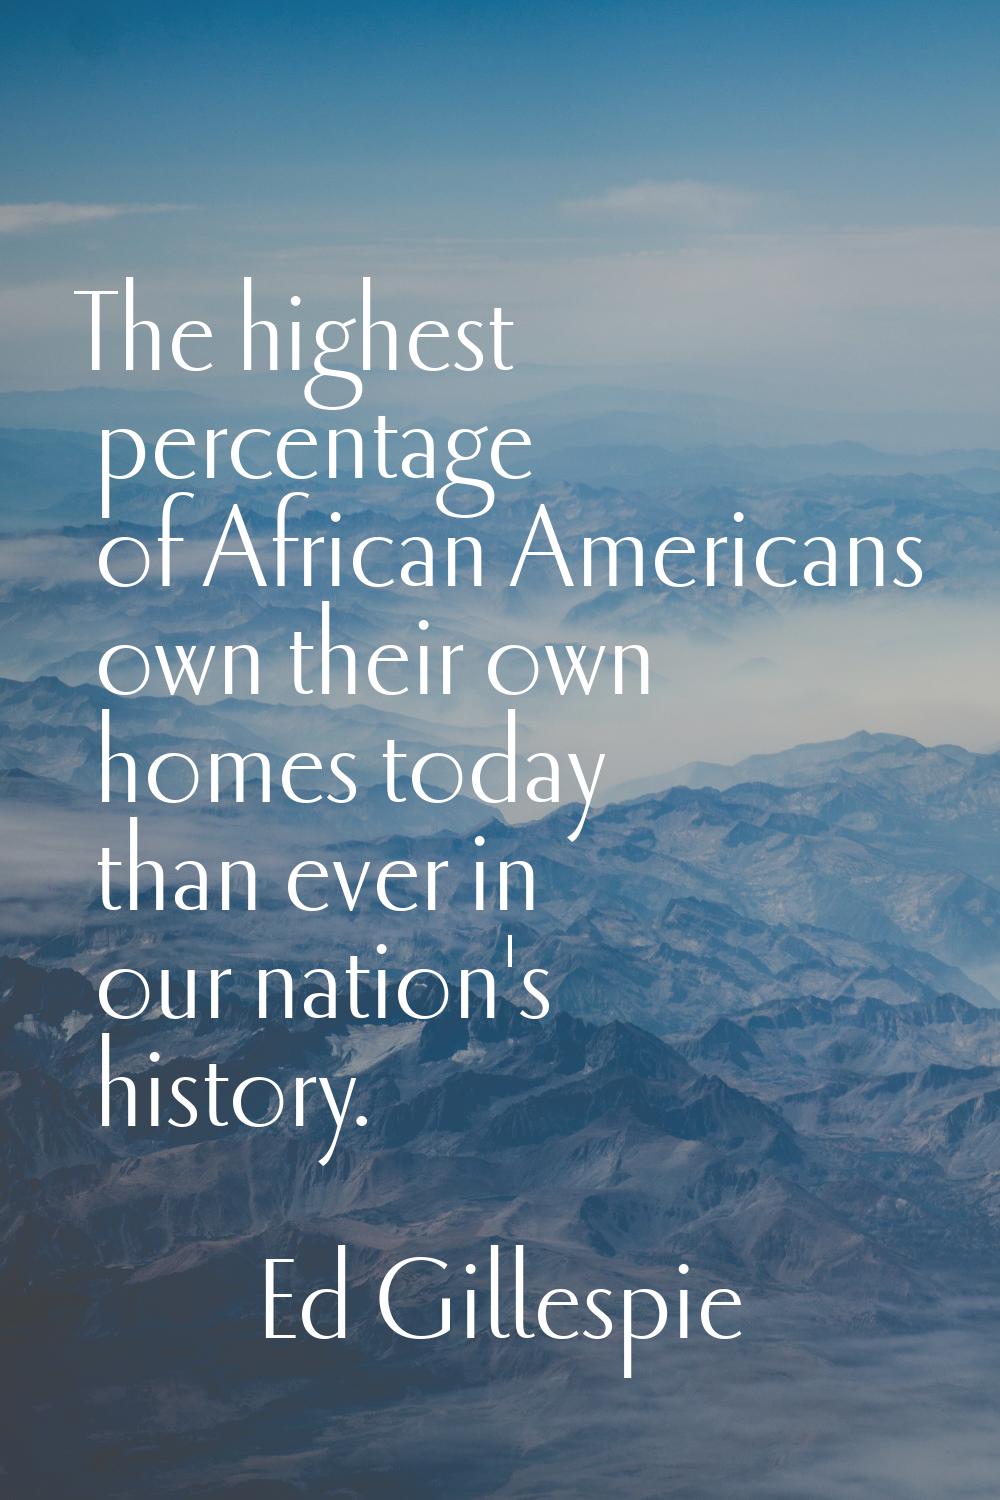 The highest percentage of African Americans own their own homes today than ever in our nation's his